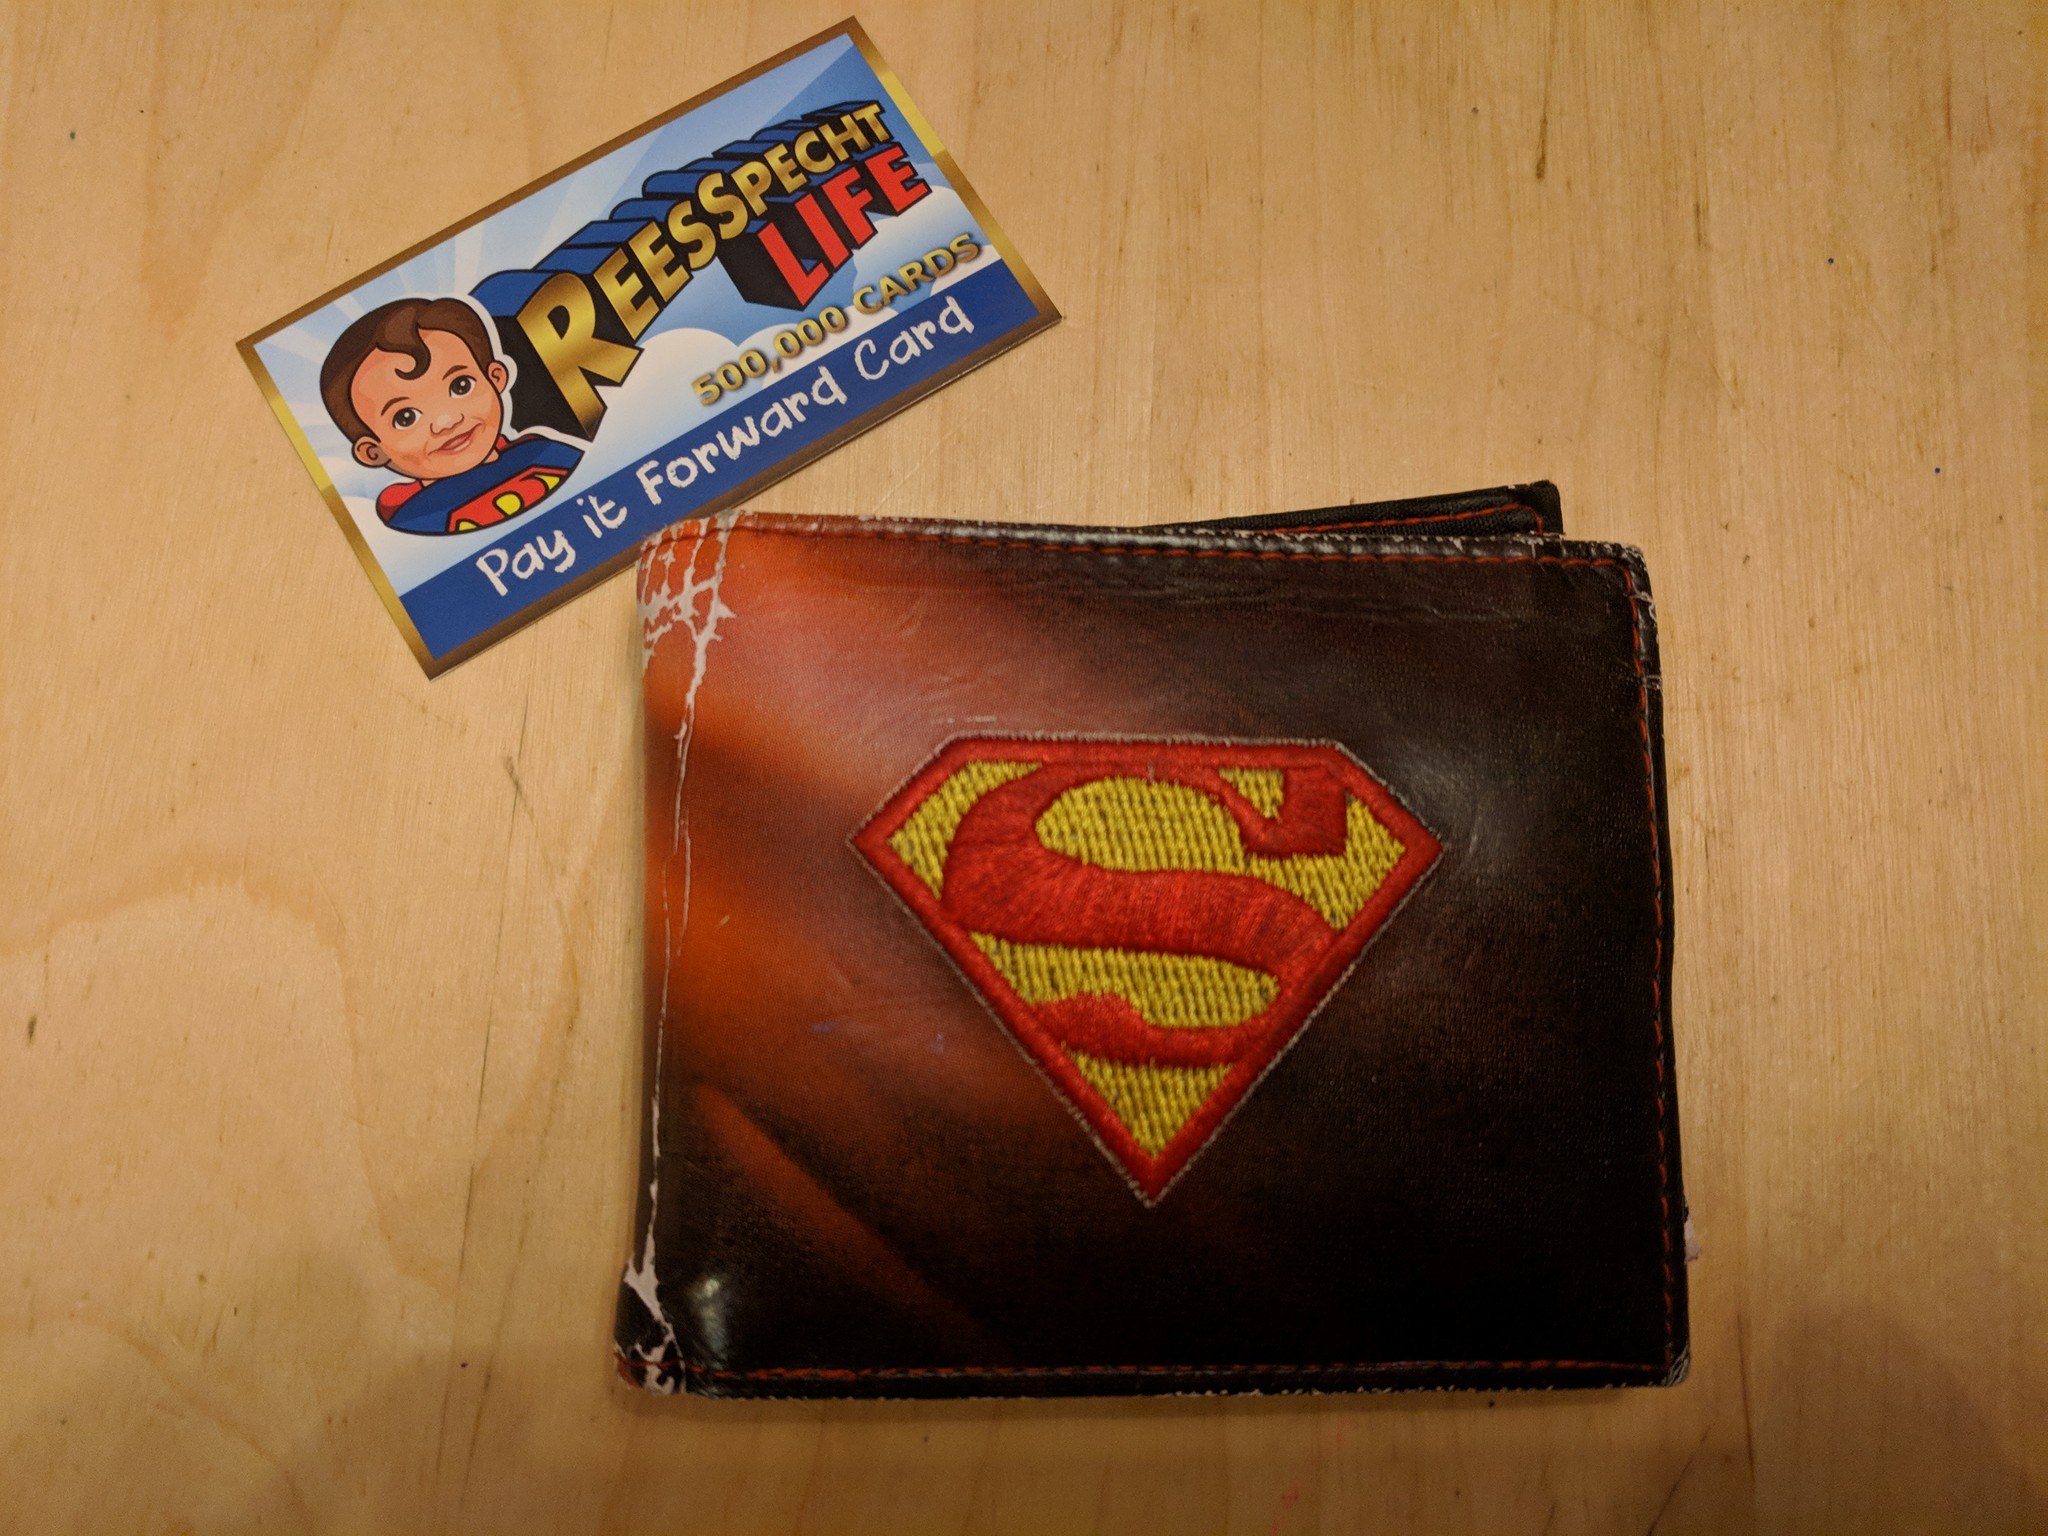 a car that reads "ReeSpecht Life 500,000 cards, pay it forward card," with a cartoon image of Rees on it, sitting next to a beat-up Superman wallet.